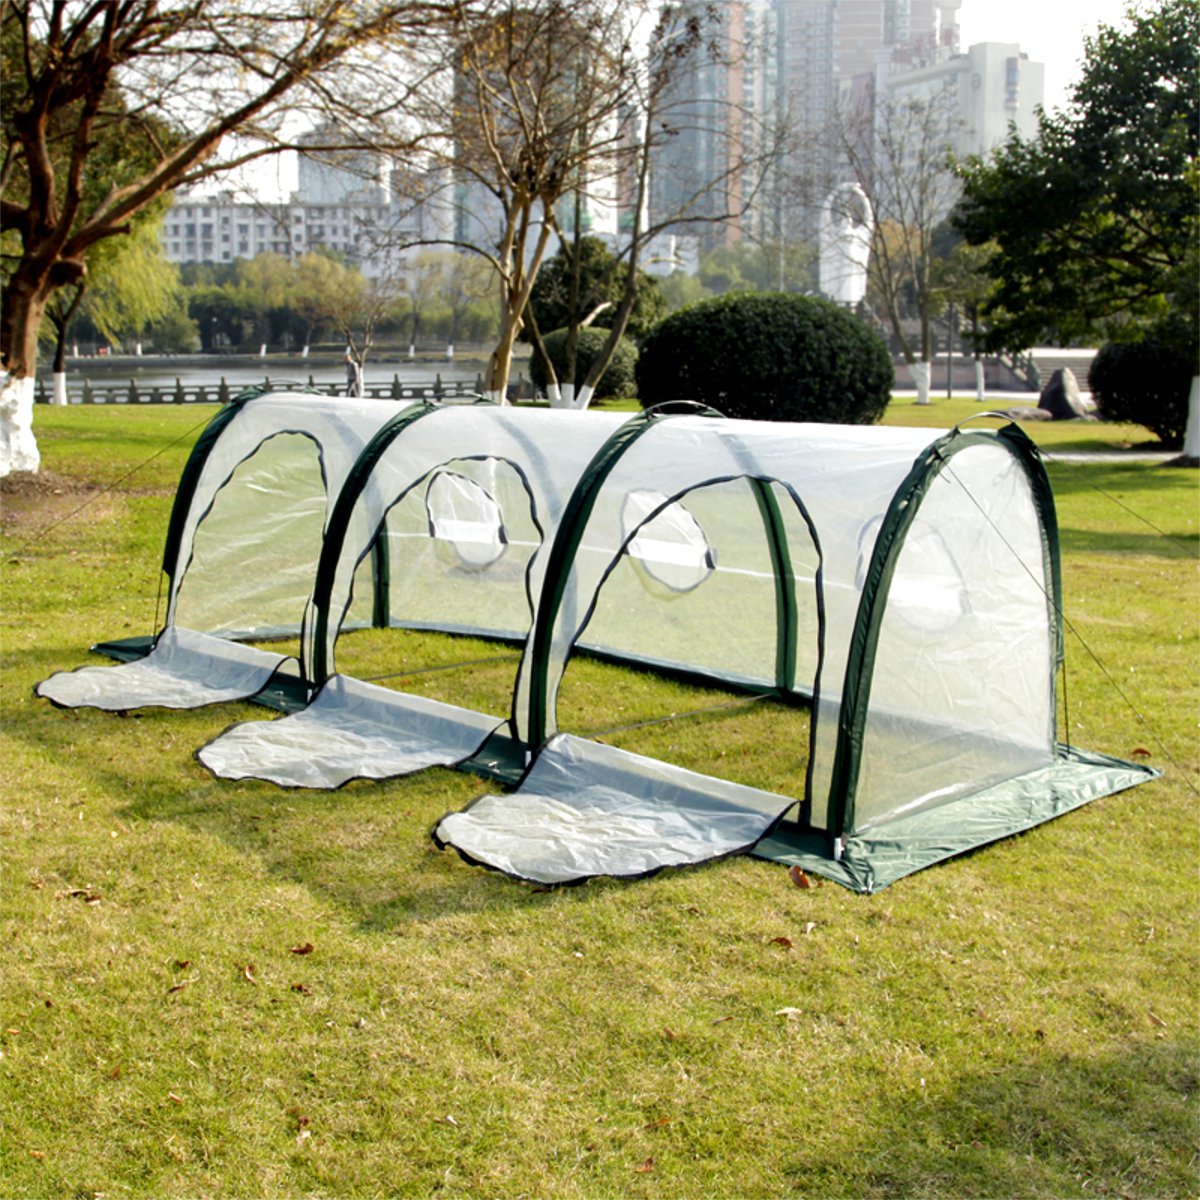 200x100x100cm-PVC-Garden-Greenhouse-Cover-Waterproof-Protects-Plants-Flowers-Planting-Heat-Proof-Col-1712540-2